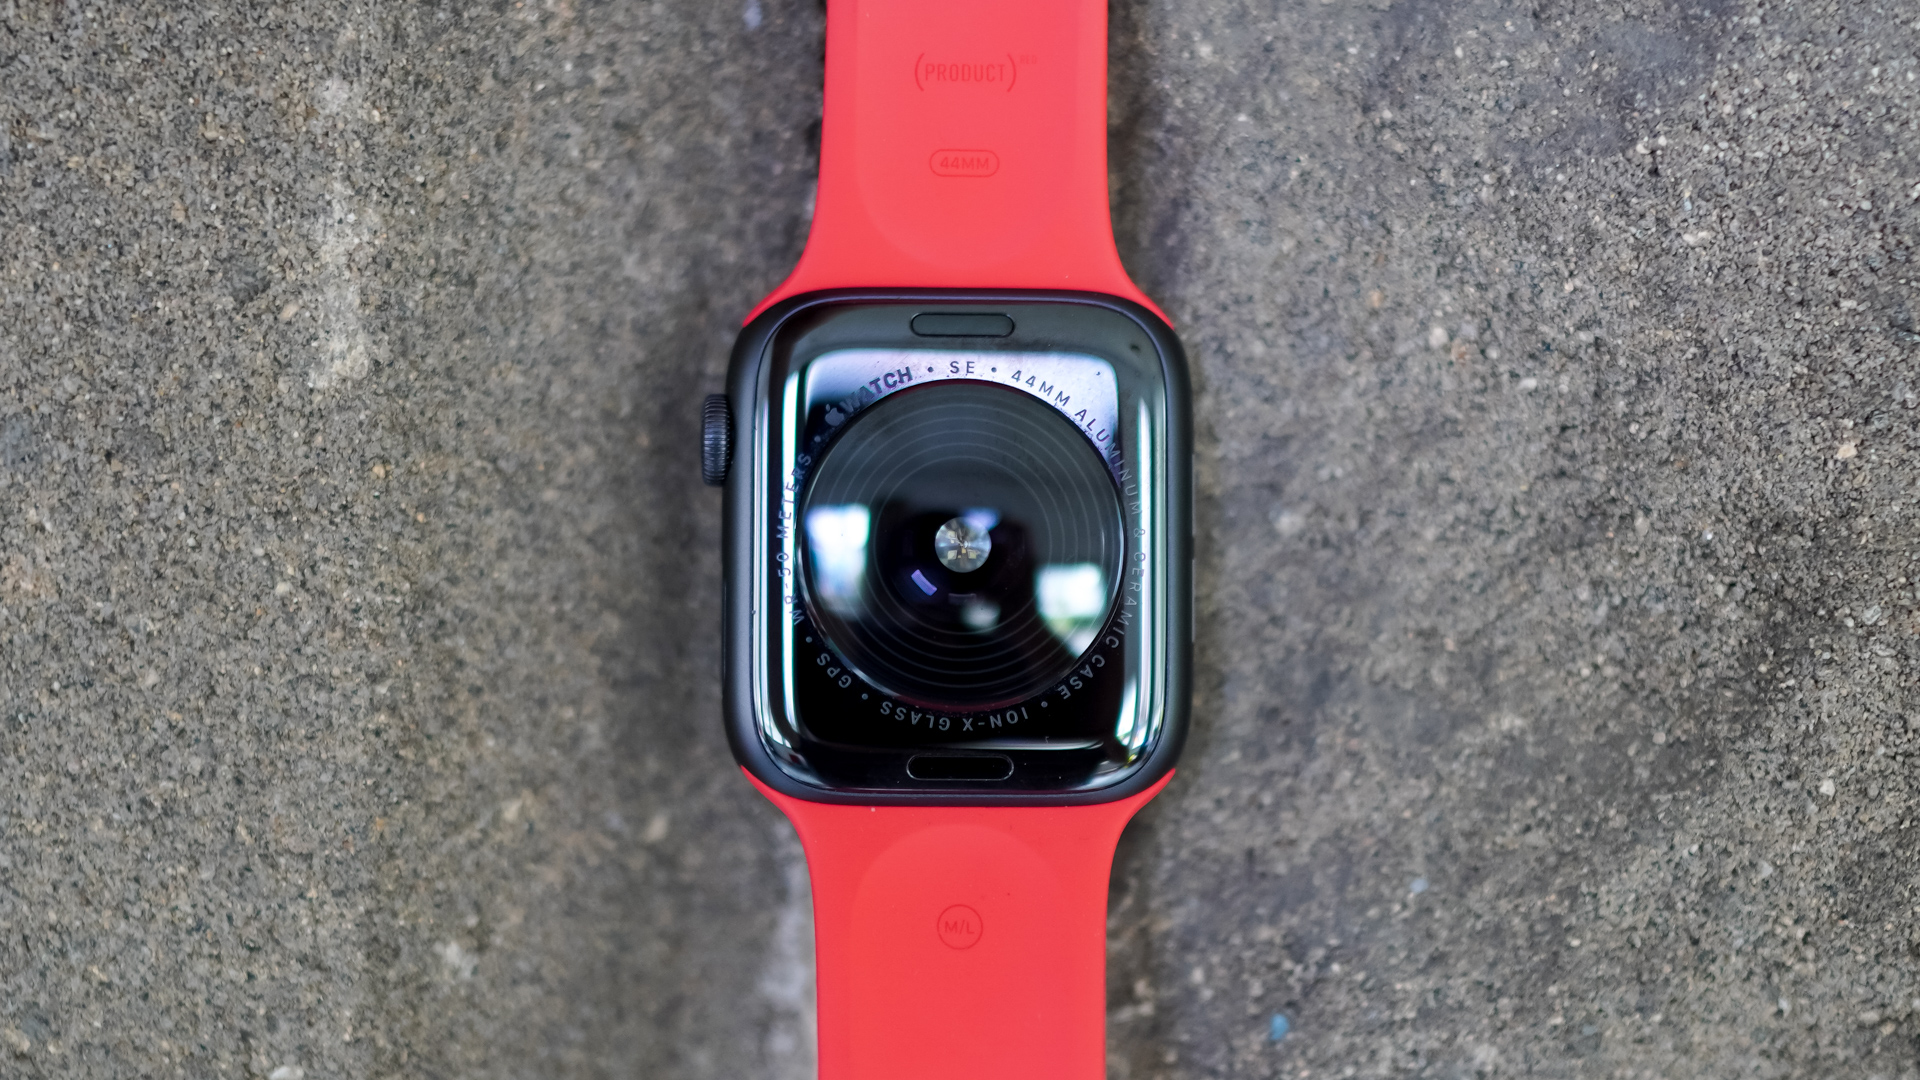 An Apple Watch SE rests face down on a stone surface displaying the sensors on the back of the device.